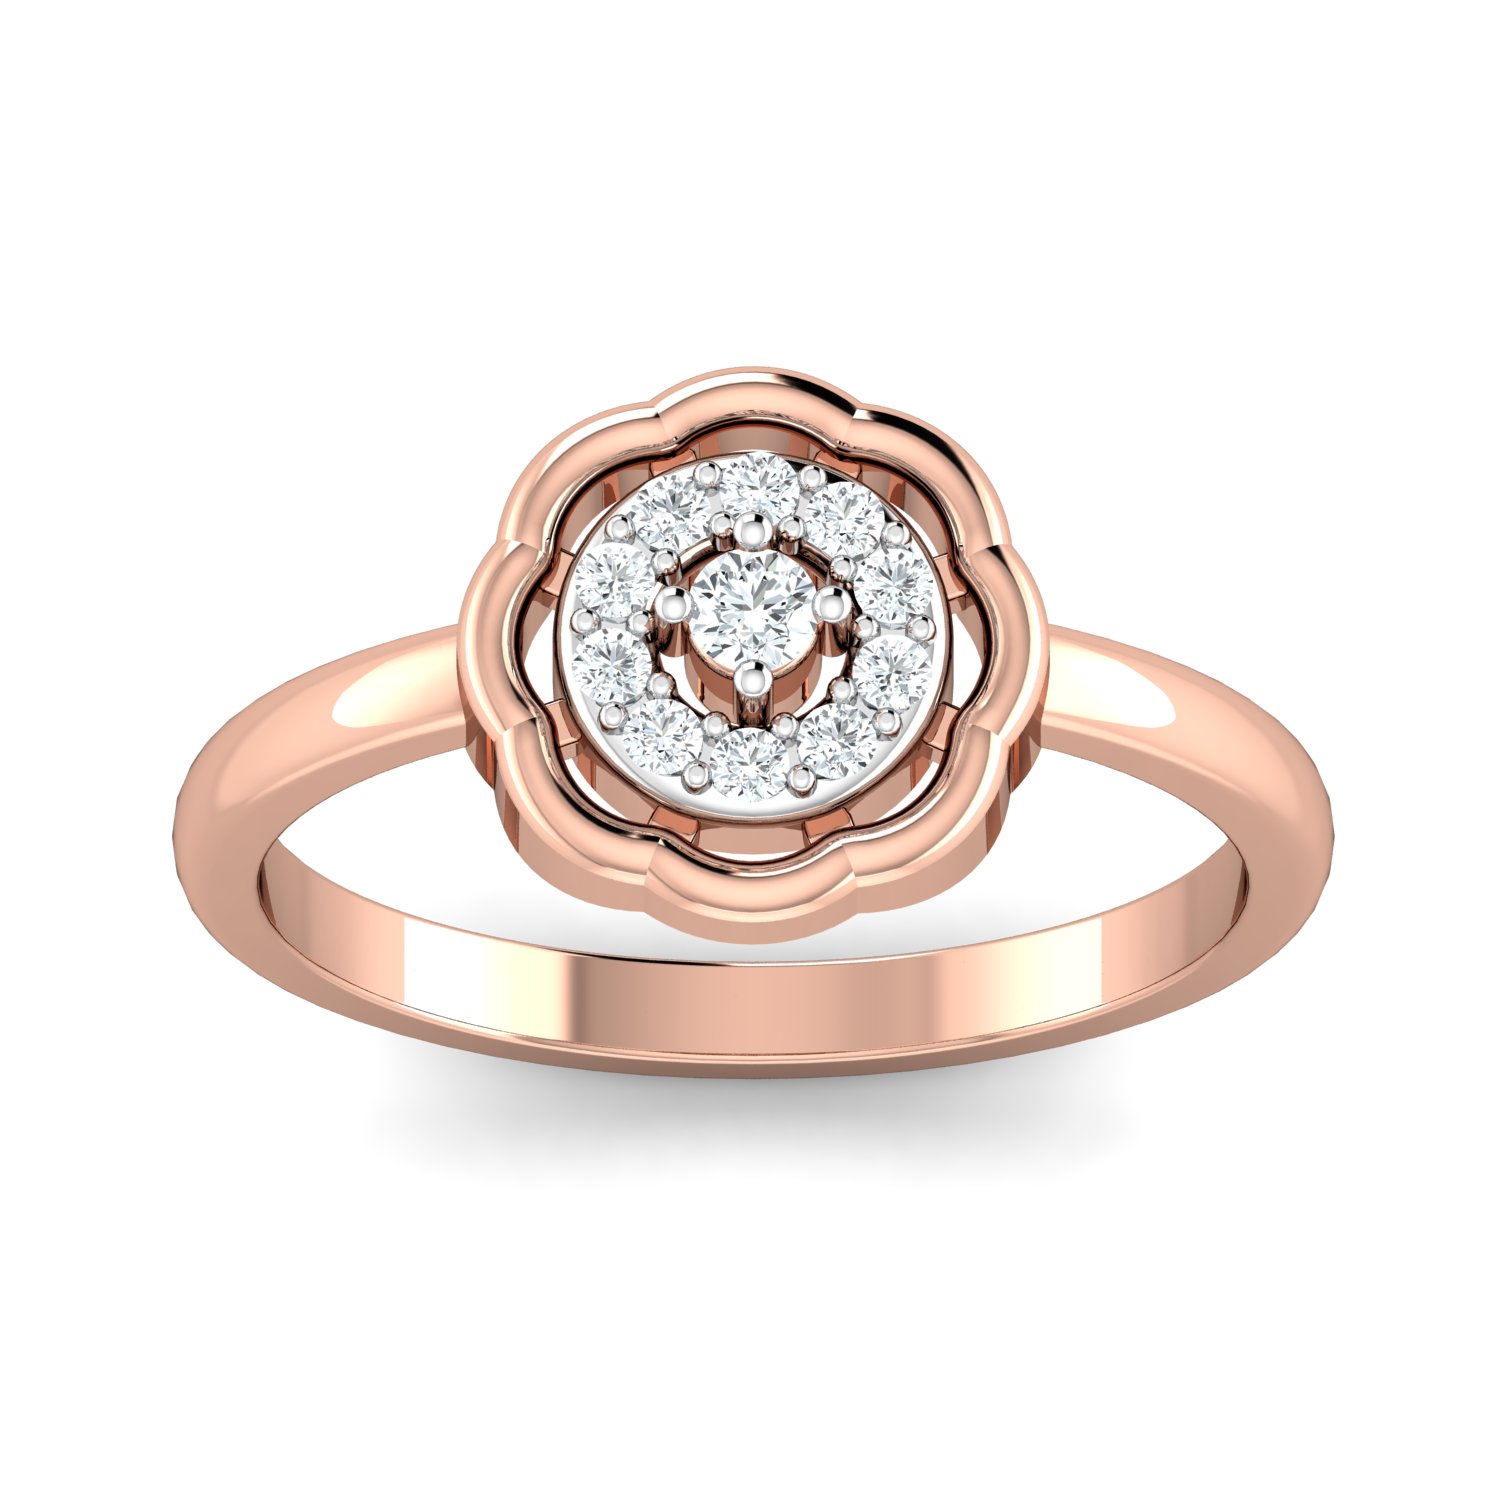 Buy Cocktail Rings Online in India | Cocktail Ring Price in Australia | Cocktail  Rings Online USA